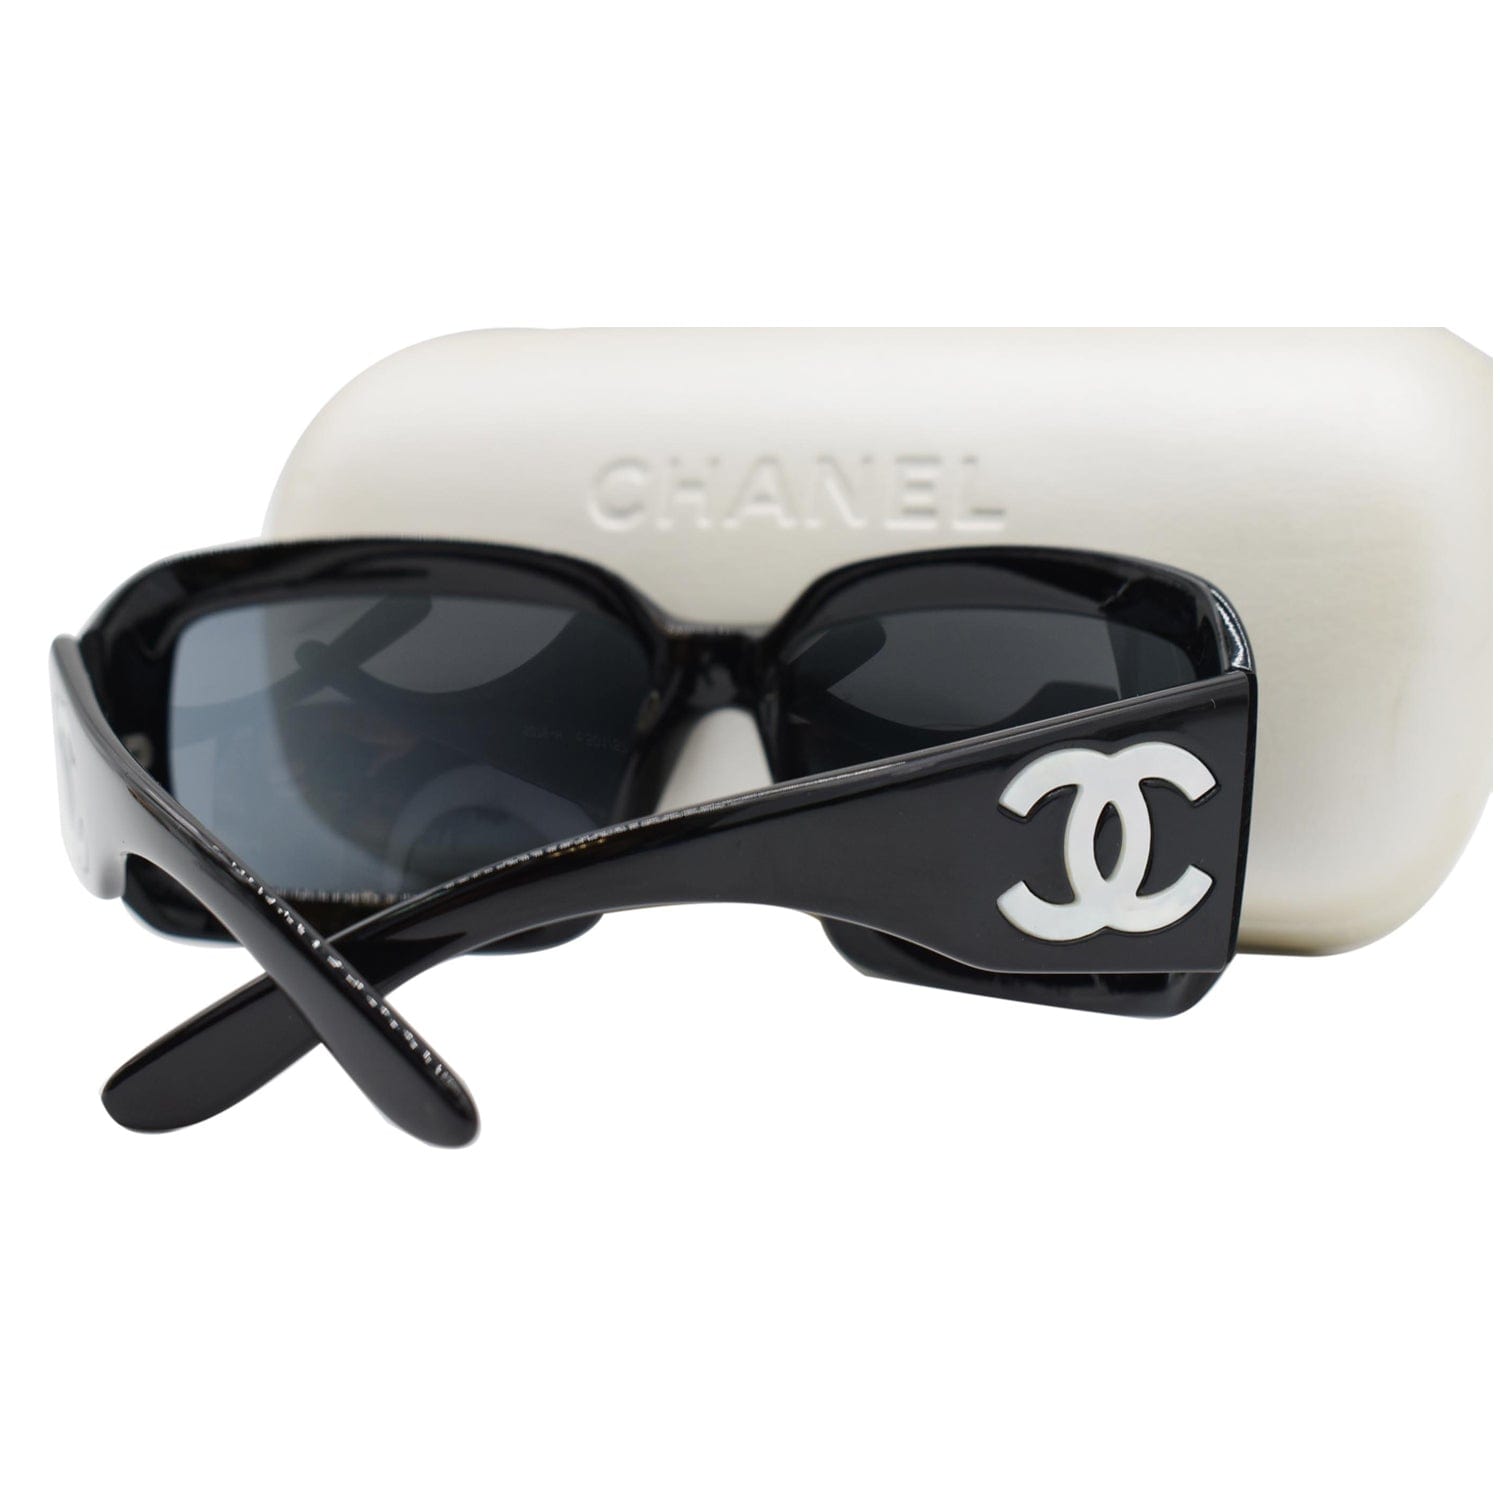 Chanel White Frame Mother of Pearl CC Logo Sunglasses- 5076-H